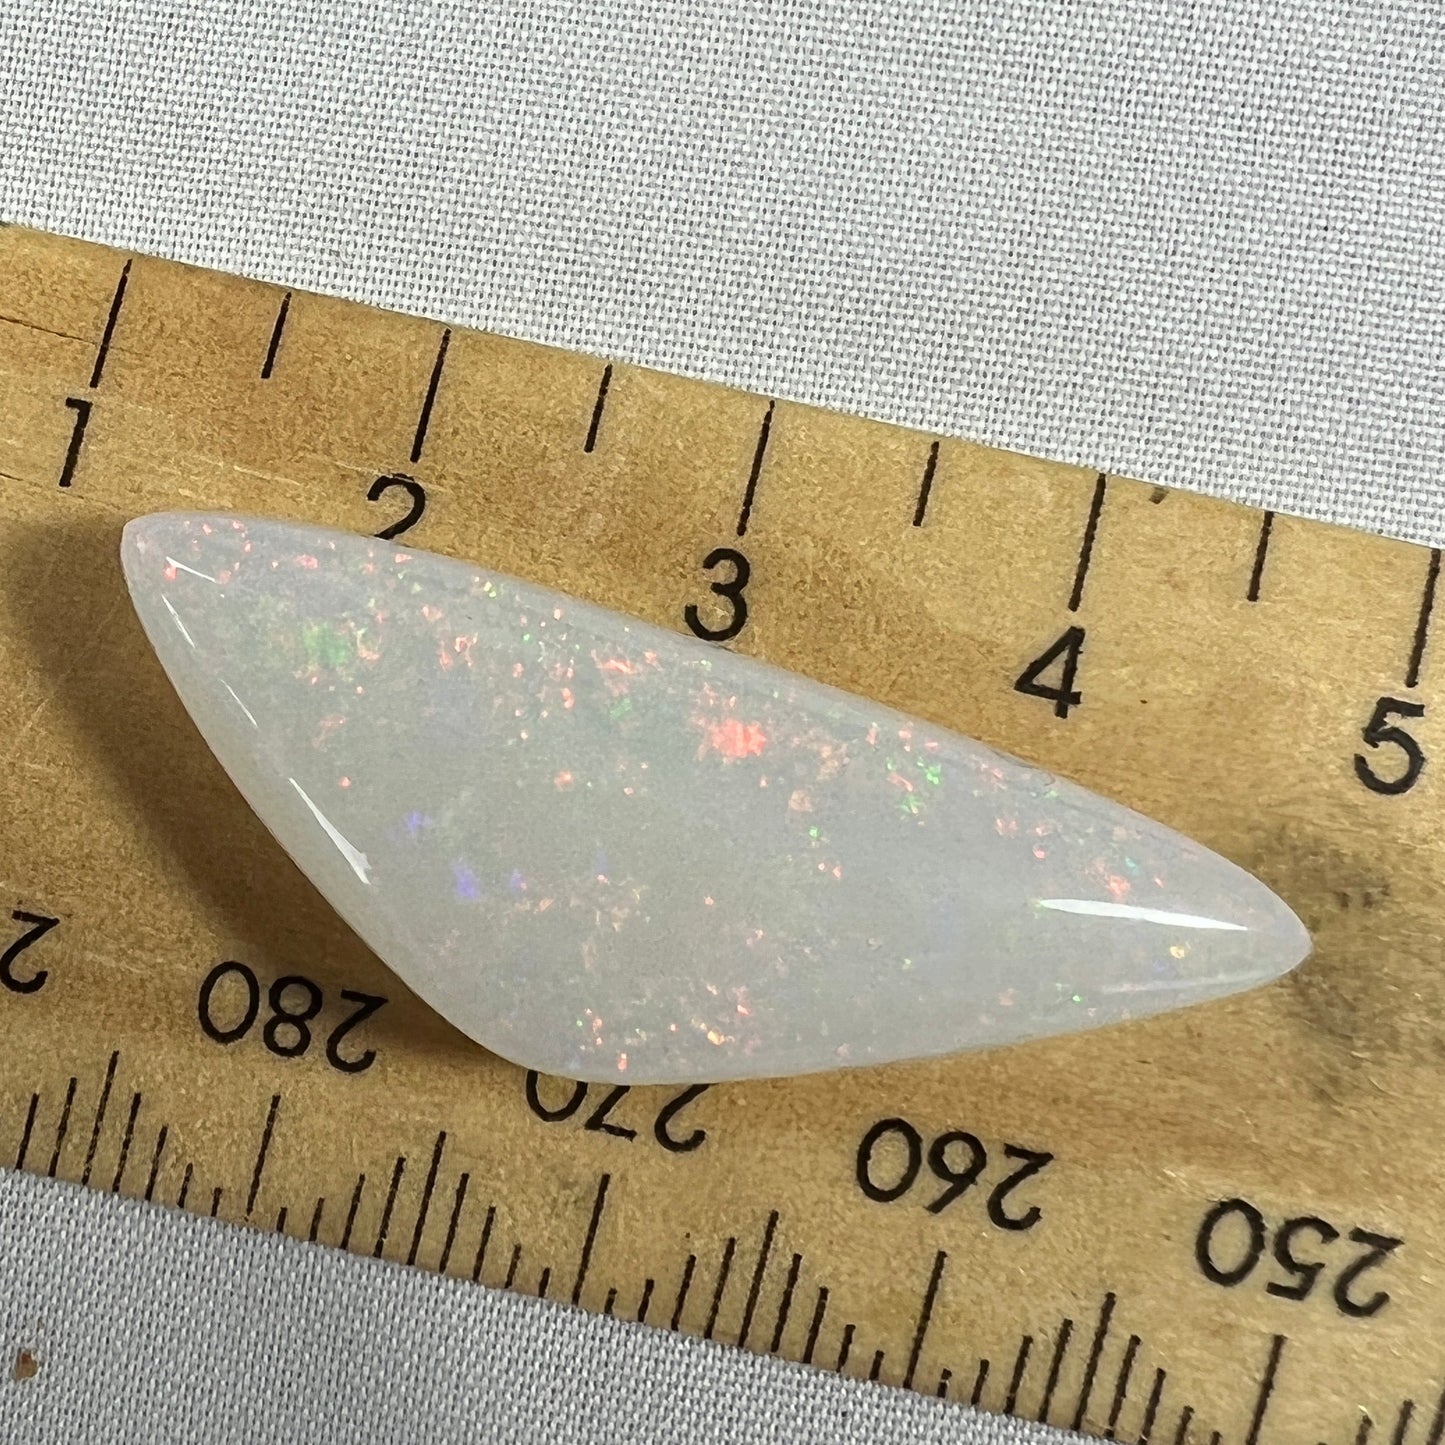 Nice piece of 19ct pin fire Coober Pedy opal, beautifully polished showing flashes of most colours. Polished by Bill Johnson.